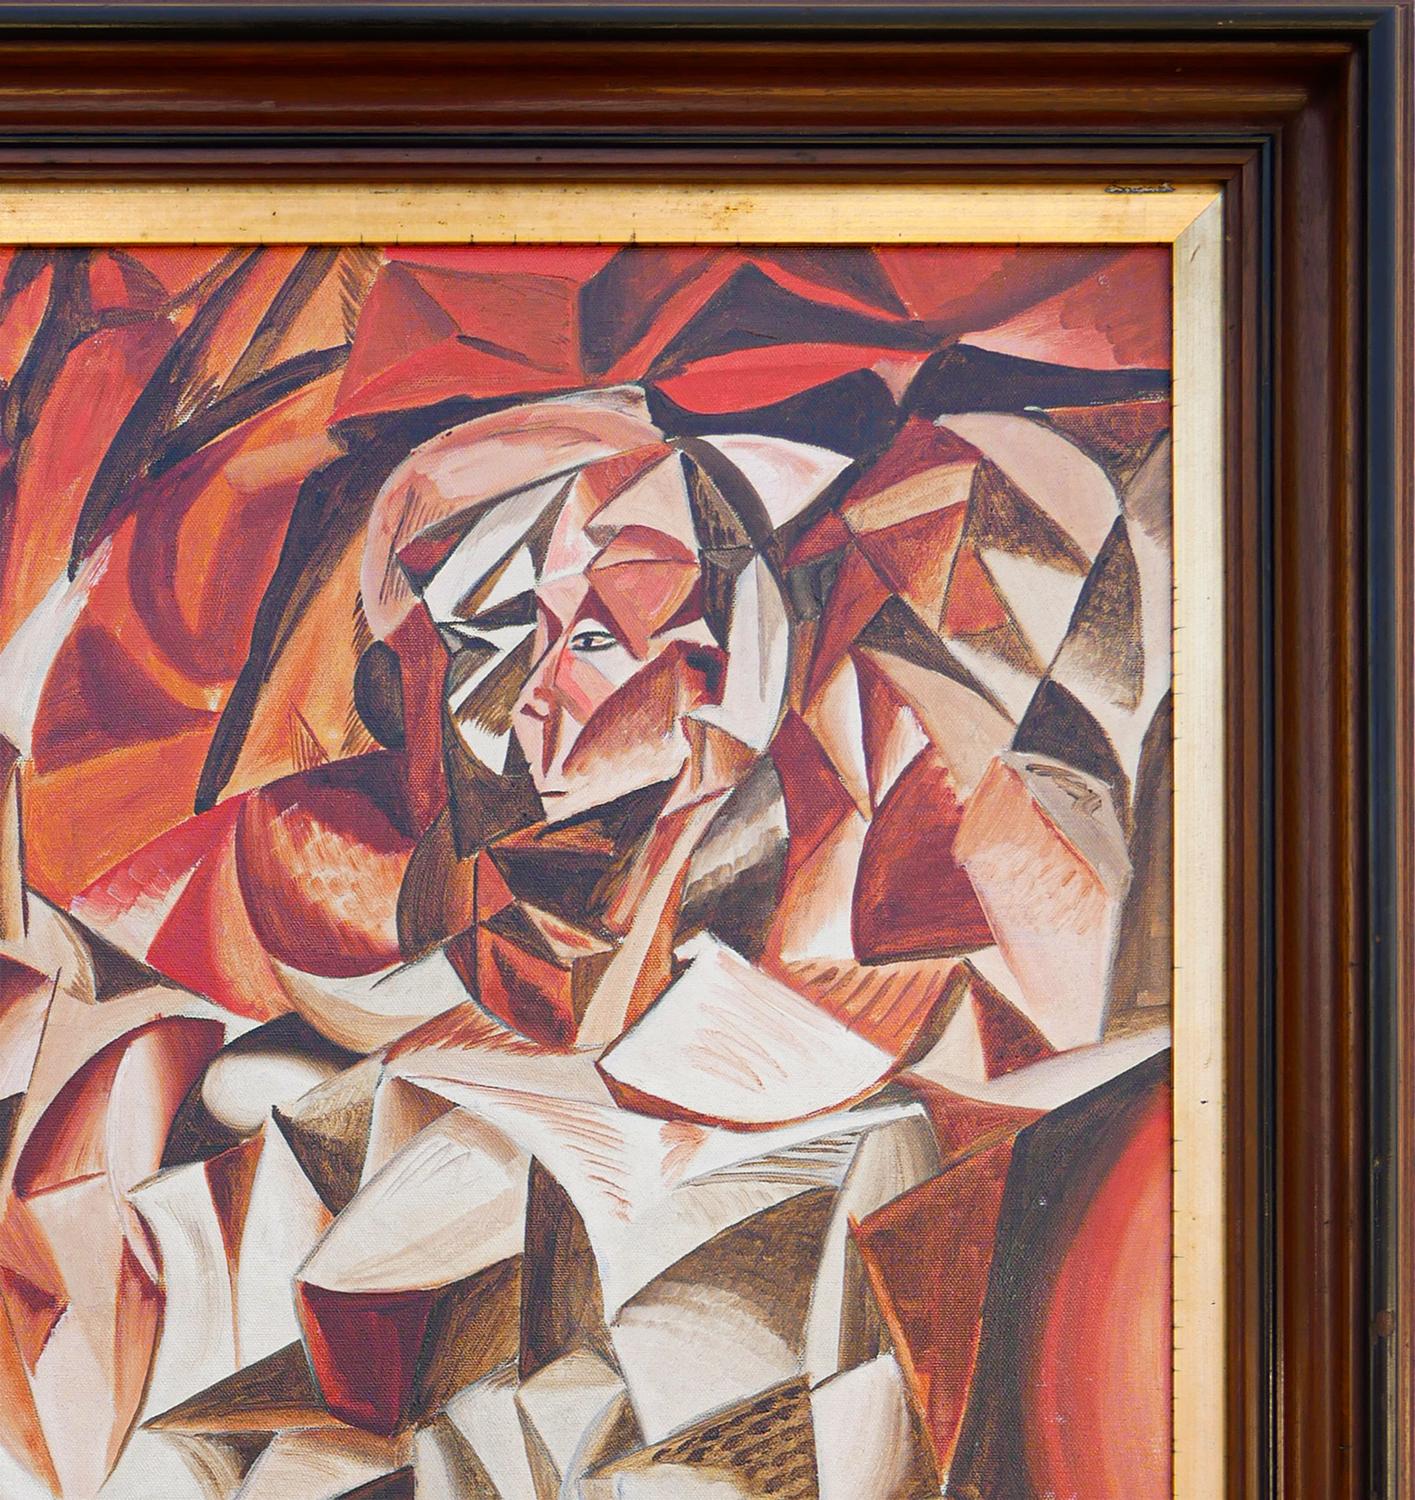 “Dienstag” Orange, Red, and Brown Abstract Cubist Figurative Painting 2